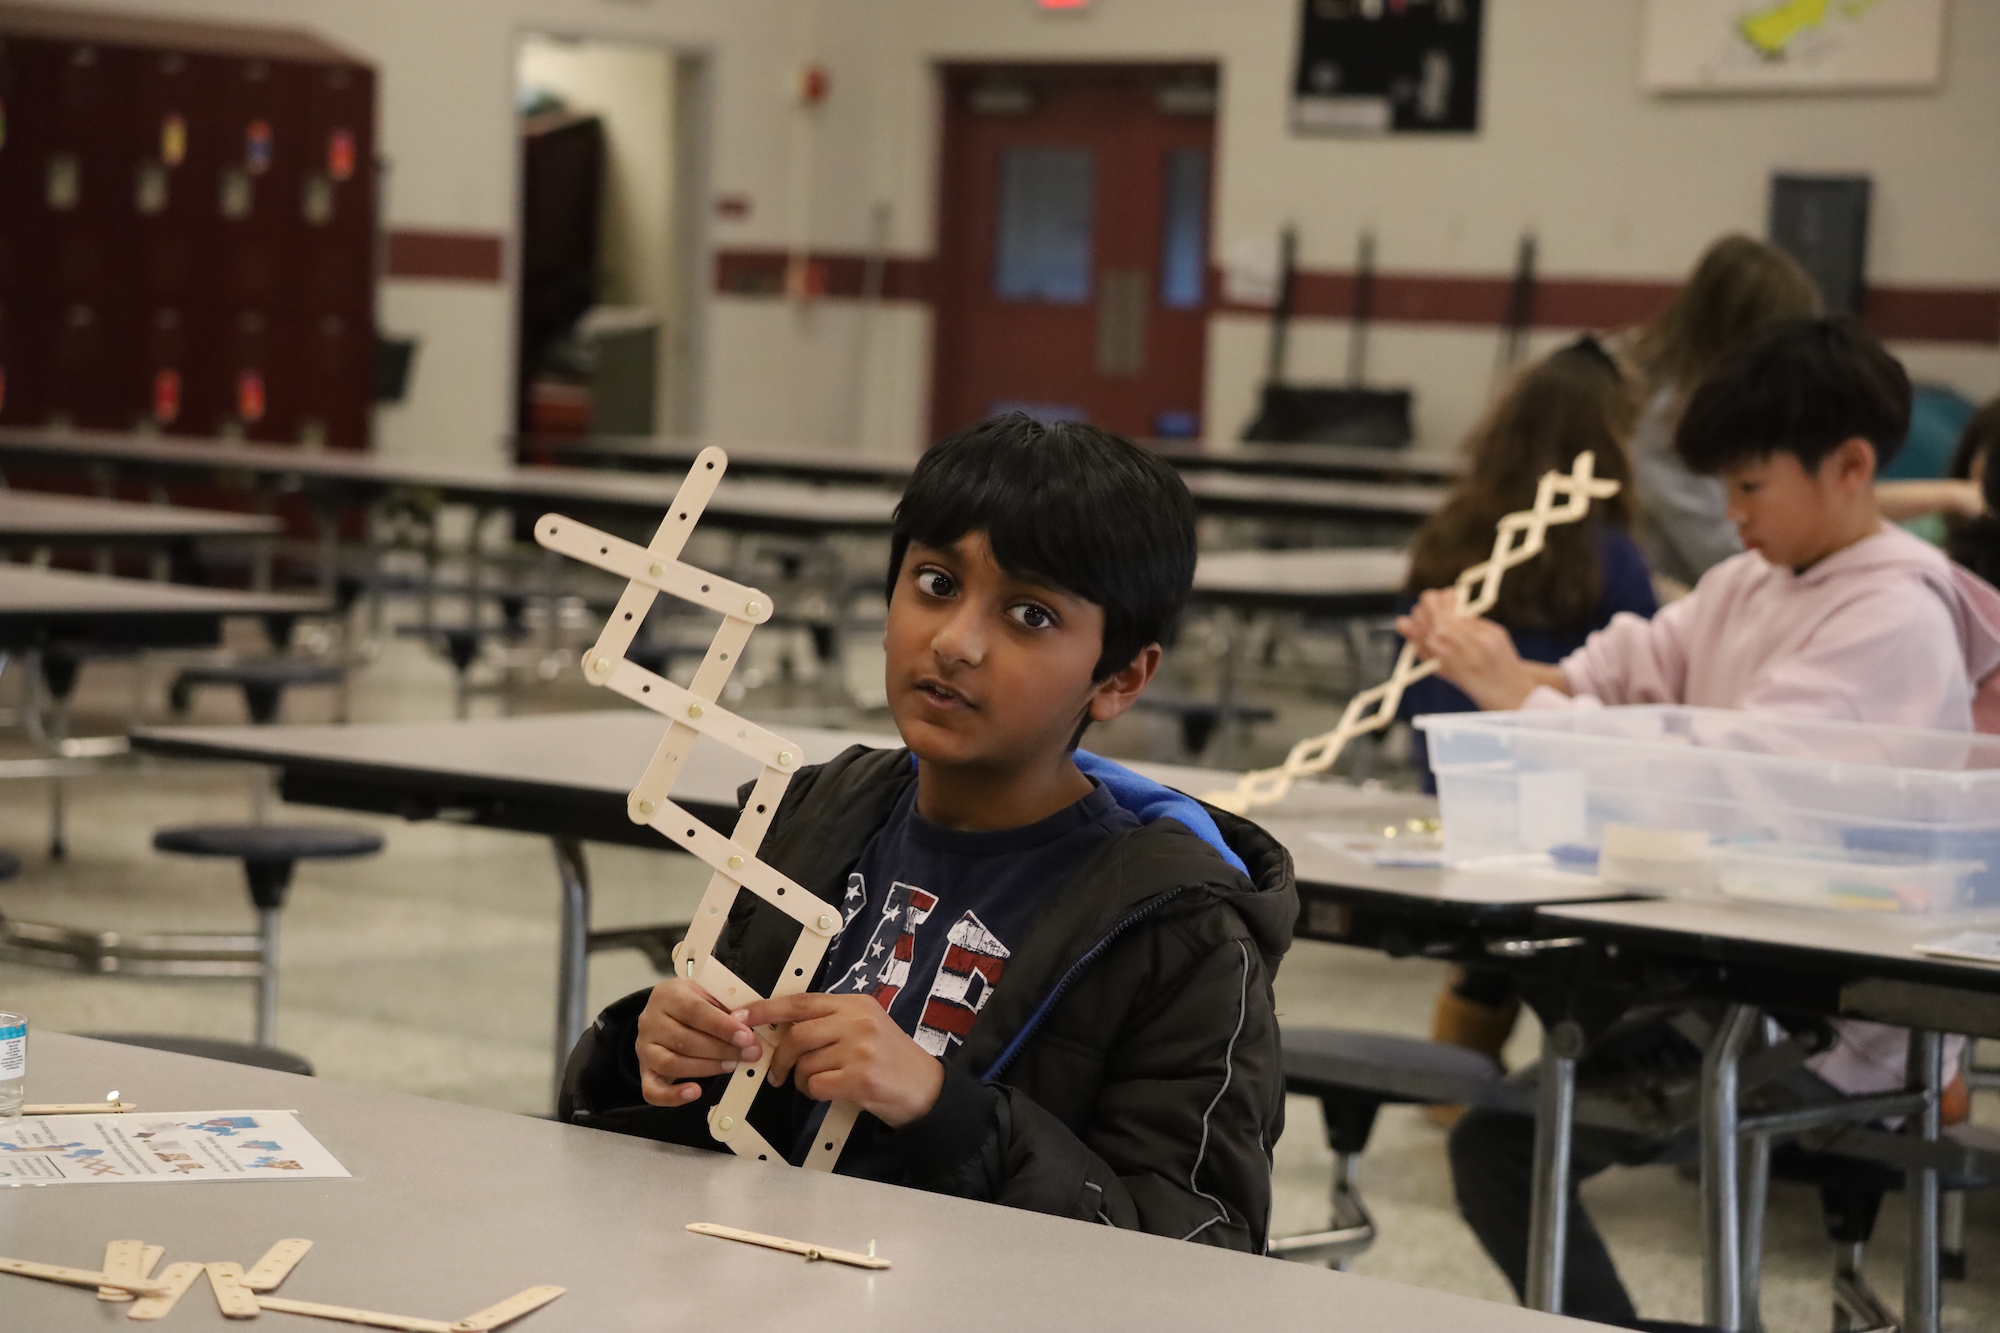 North Street students get hands-on approach to engineering